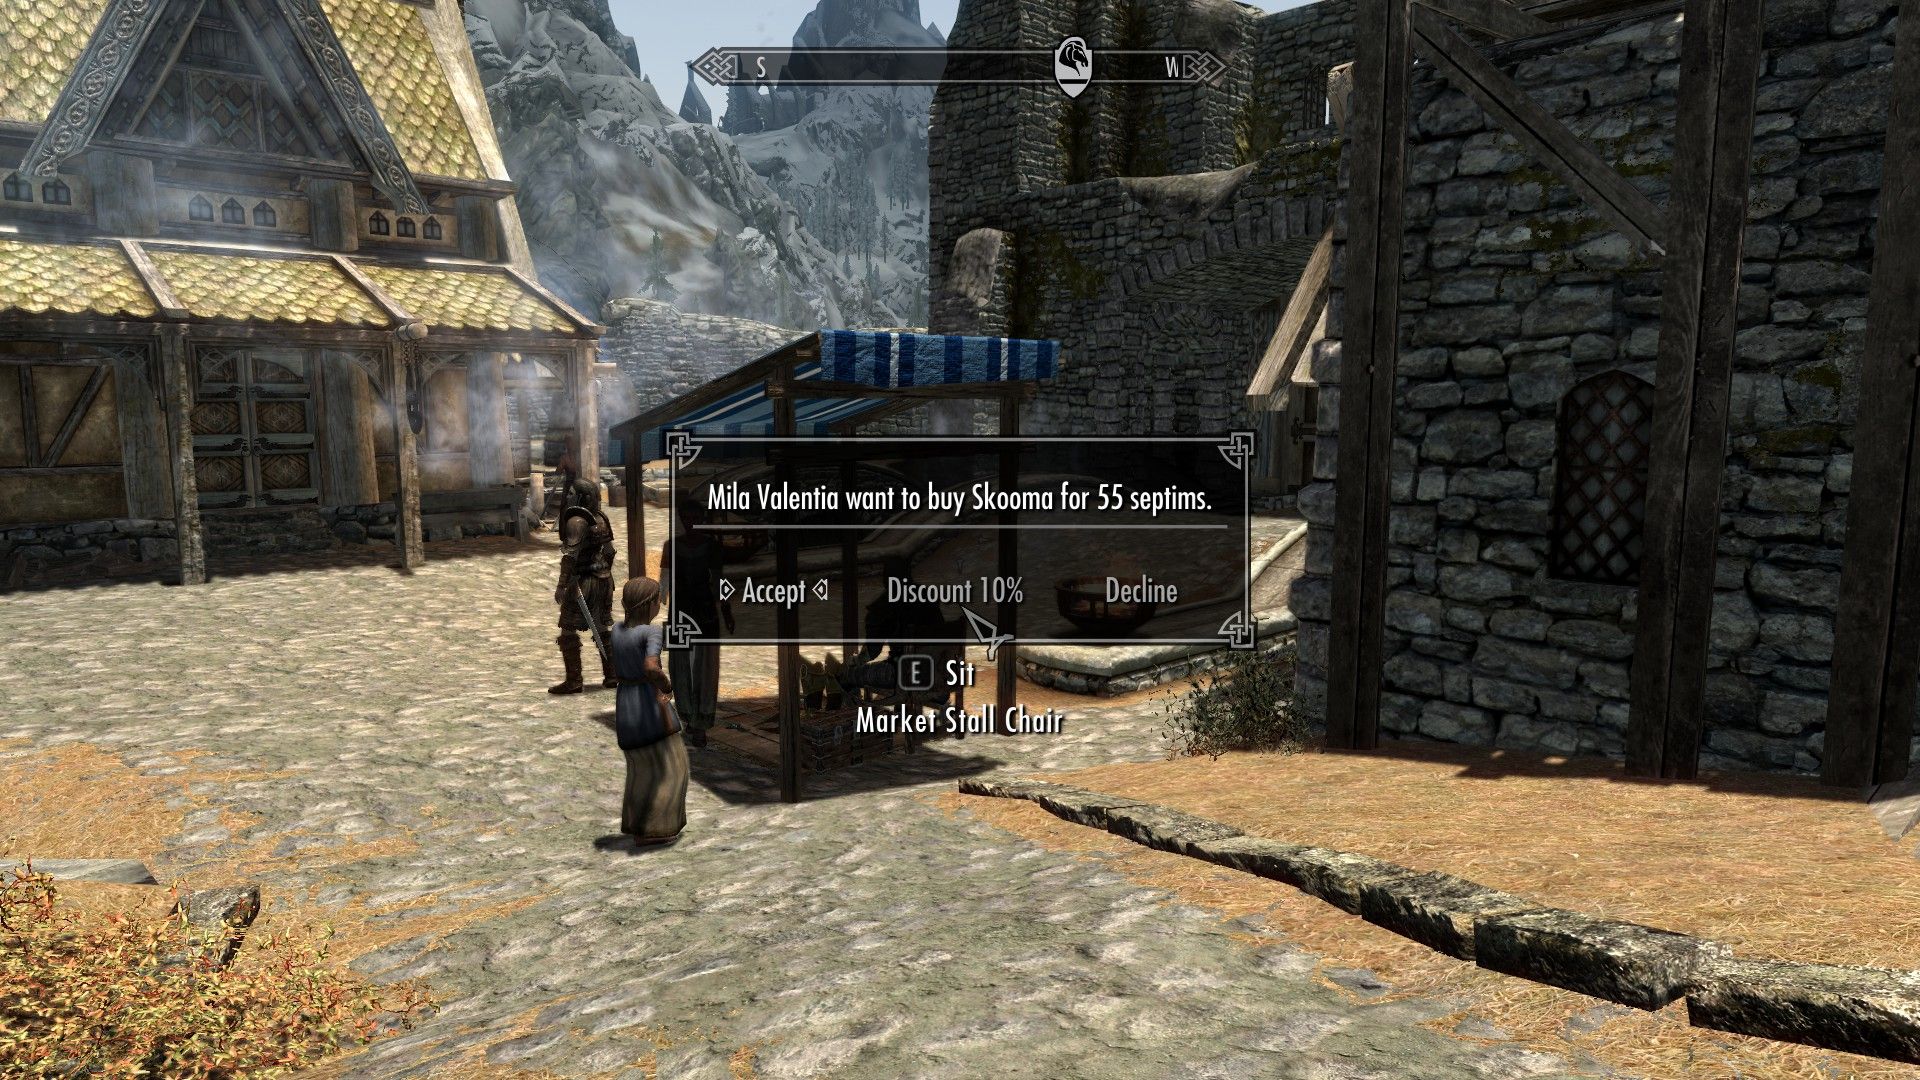 About an hour after reinstalling and modding Skyrim, I found myself dealing drugs to kids on the streets of Whiterun.